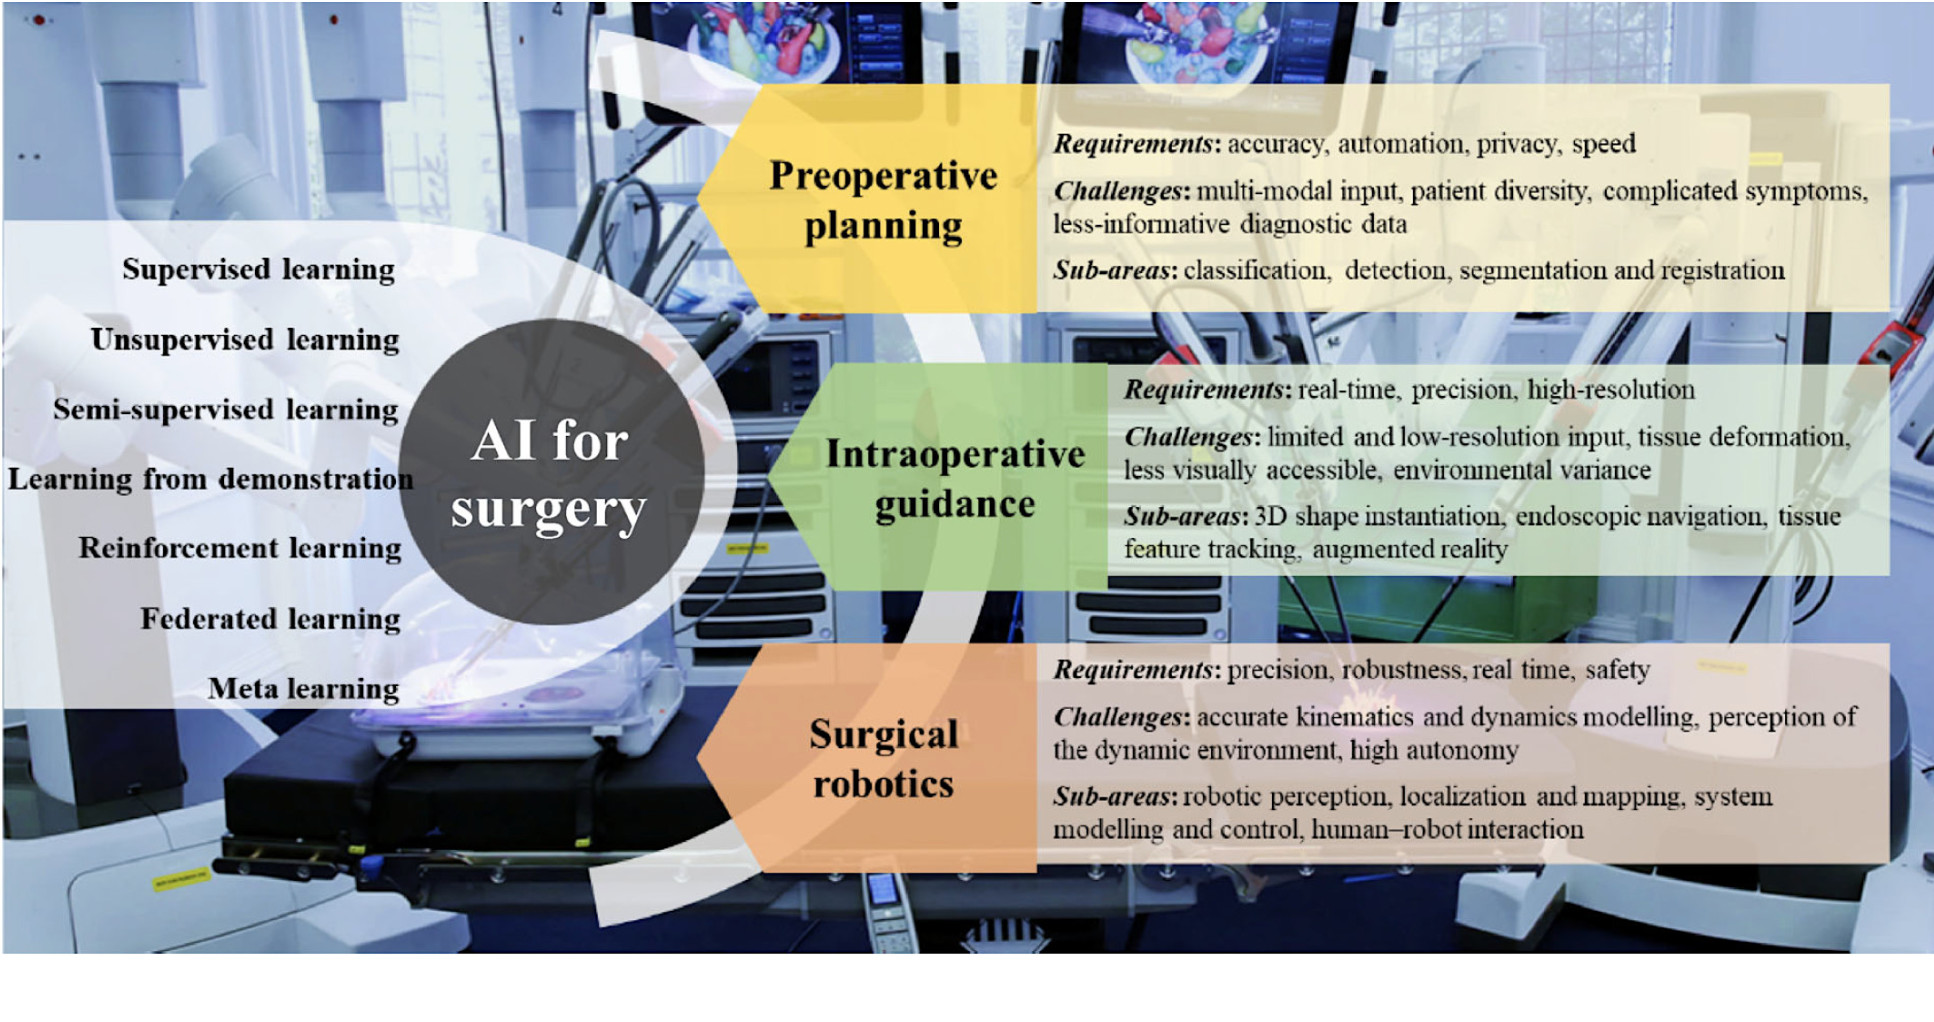 An overview of popular AI techniques, as well as the key requirements, challenges, and sub-areas of AI used in preoperative planning, intraoperative guidance, and surgical robotics.